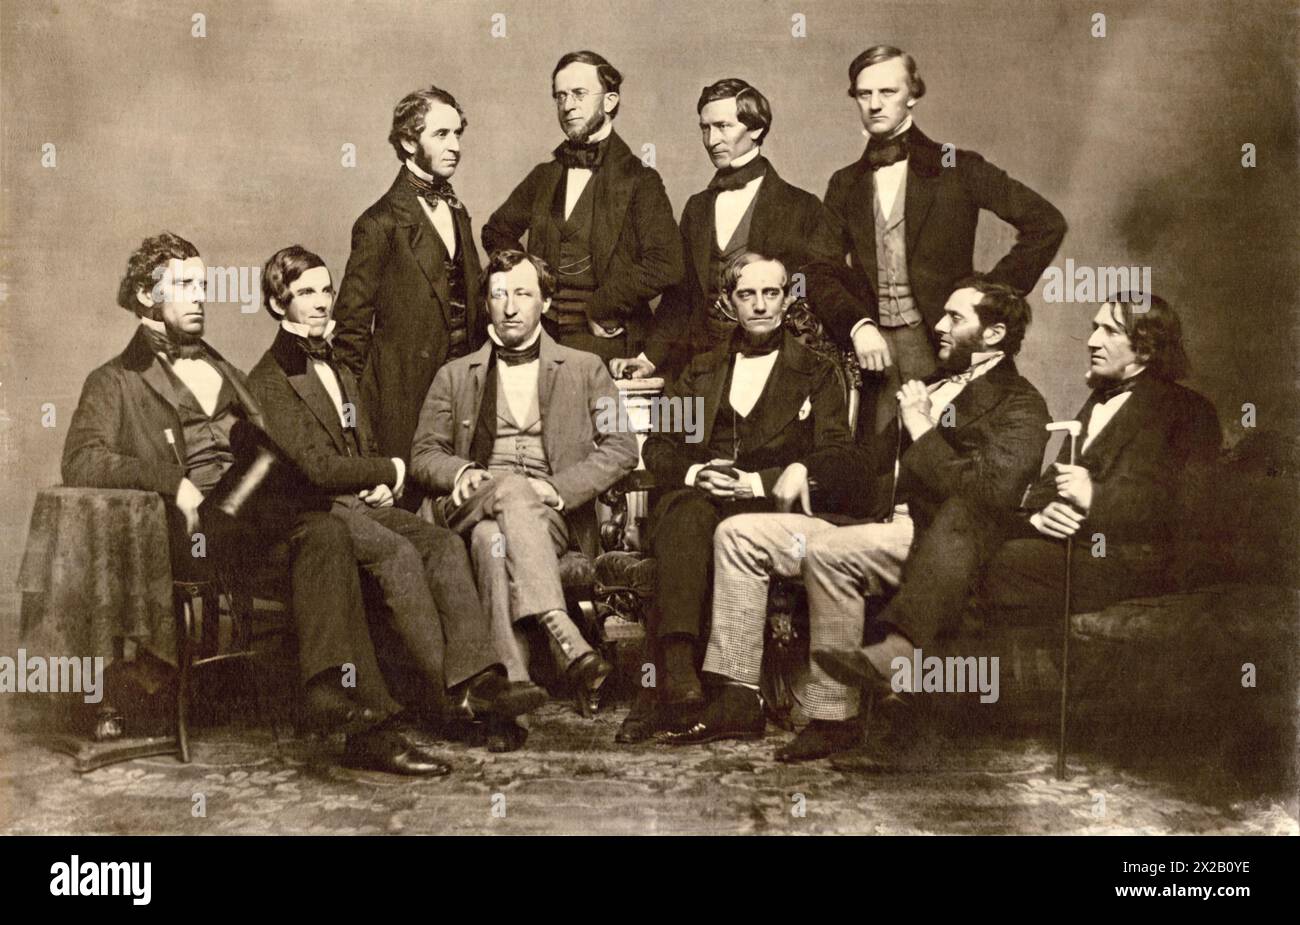 Jonathan Mason Warren was a Boston medical doctor, believed to have been the first to administer anesthesia to a child during surgery. He was the son of John Collins Warren - in this photo J. M. Warren (sitting, third from right) with other members of the Boston Society for Medical Improvement, about 1850 Stock Photo